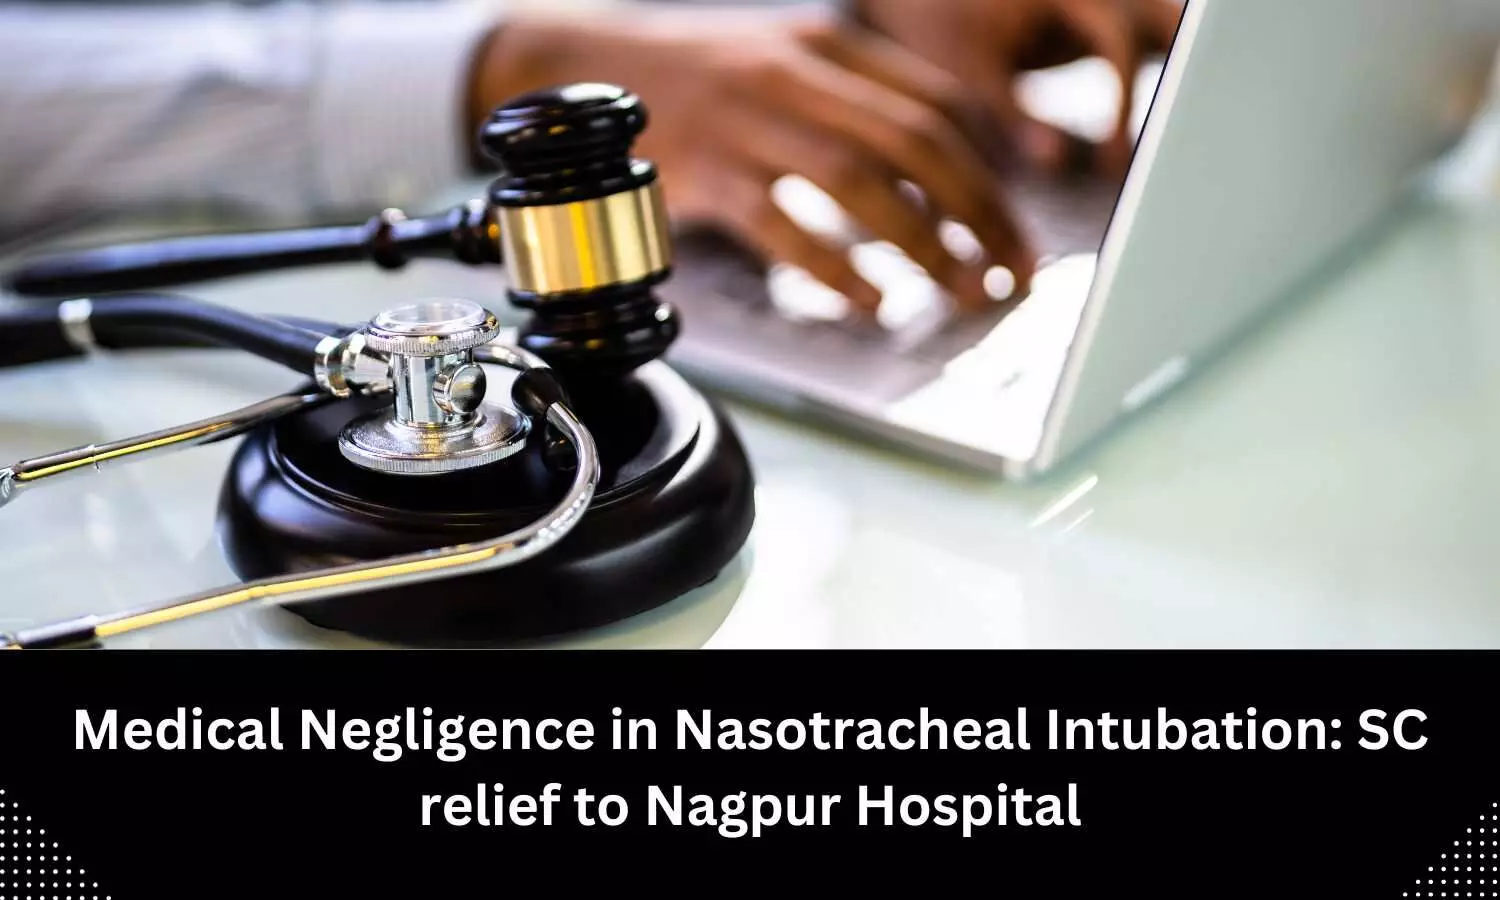 SC relief to Nagpur Hospital, ICU In-Charge, Radiologist, ENT Surgeon